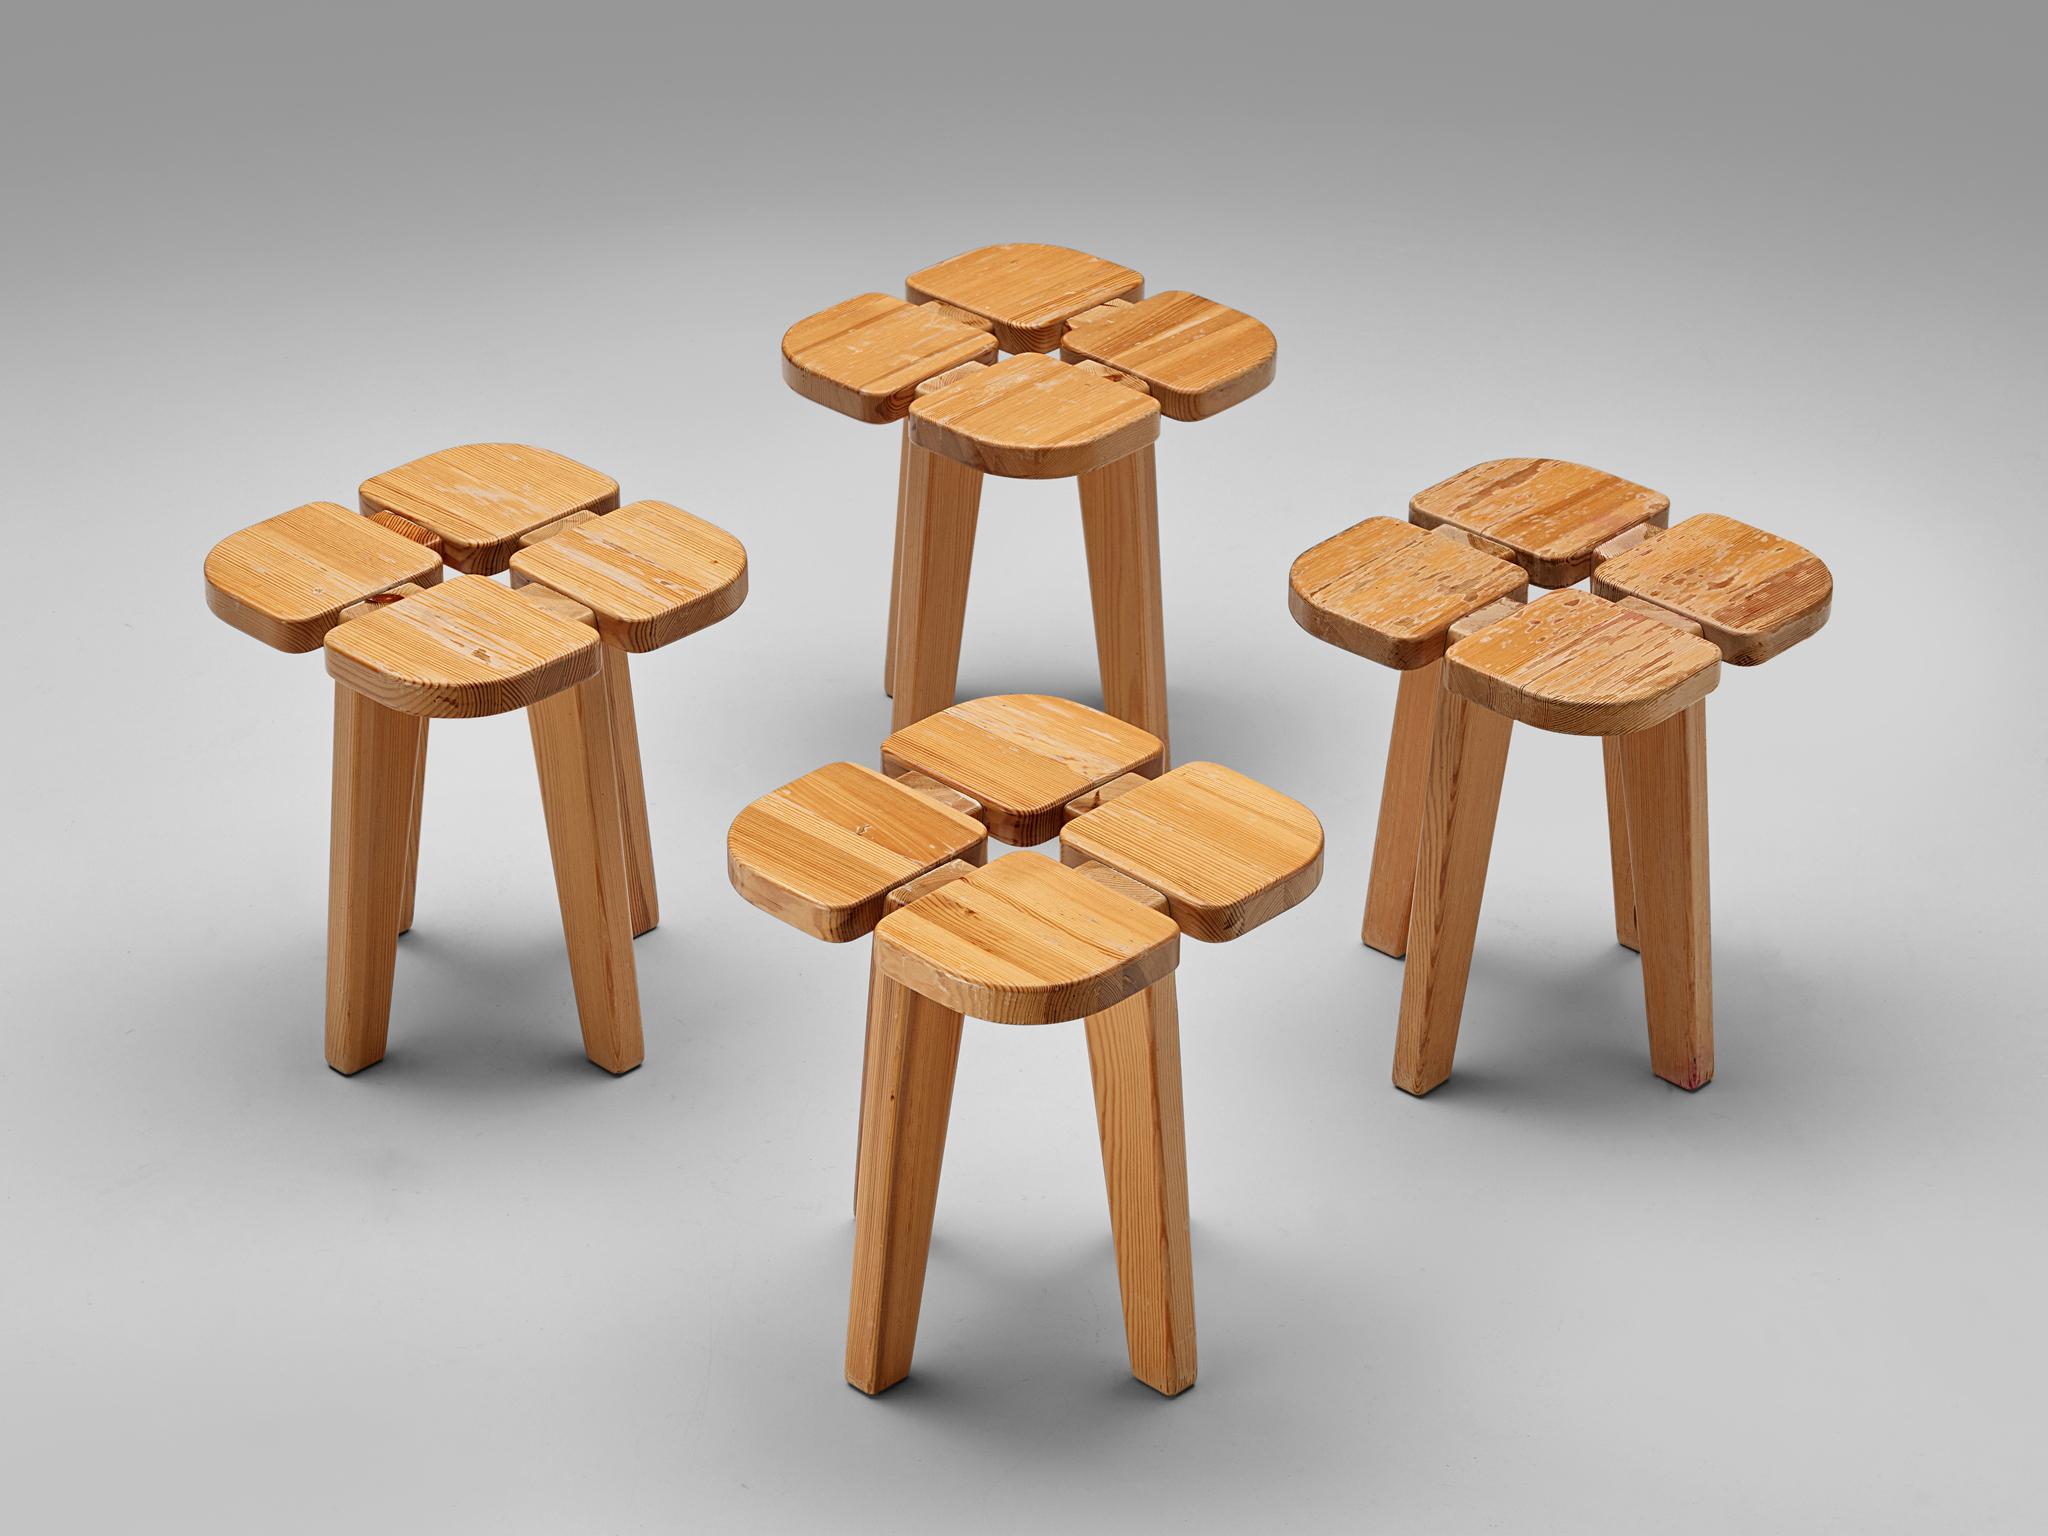 Lisa Johansson-Pape for Stockman Orno, 'Apila' stools, pine, Finland, 1960s. 

Stools in solid pine. The design is simplistic: A clover top with four sloping legs. The construction of the stools is nicely visible on the top. Very elegant and